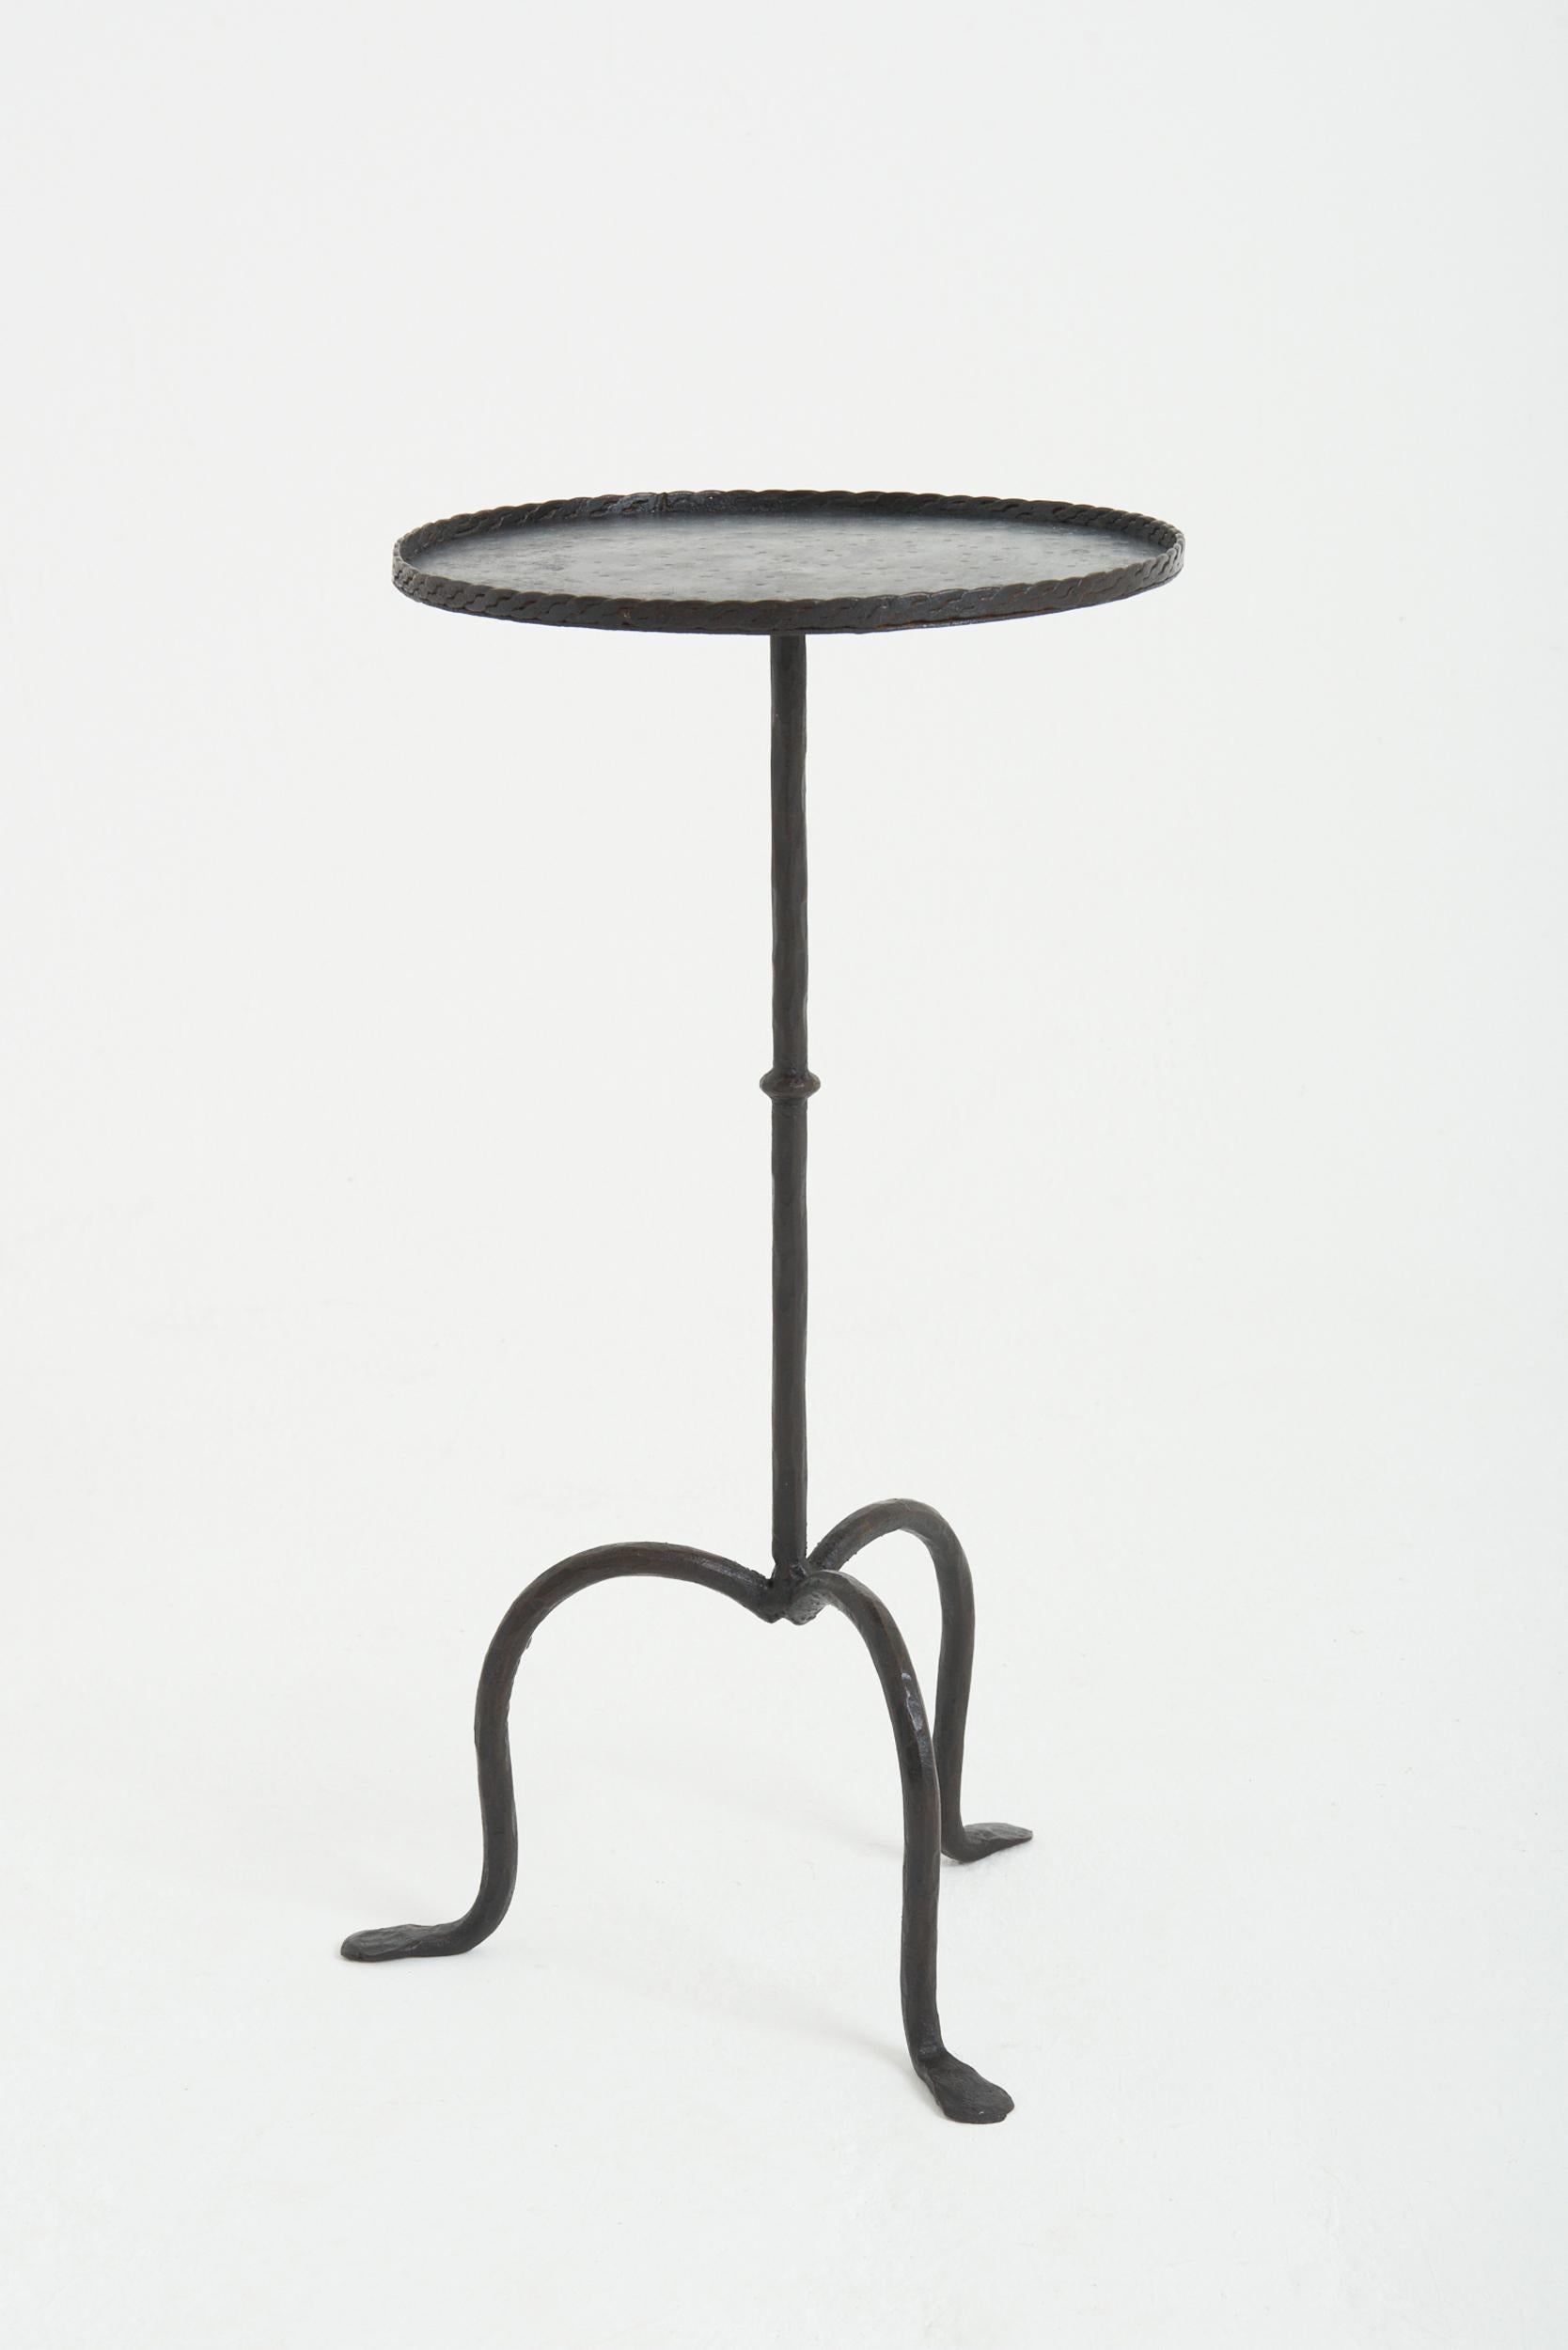 A wrought iron martini table.
Spain, mid 20th Century
58 cm high by 30.5 cm diameter